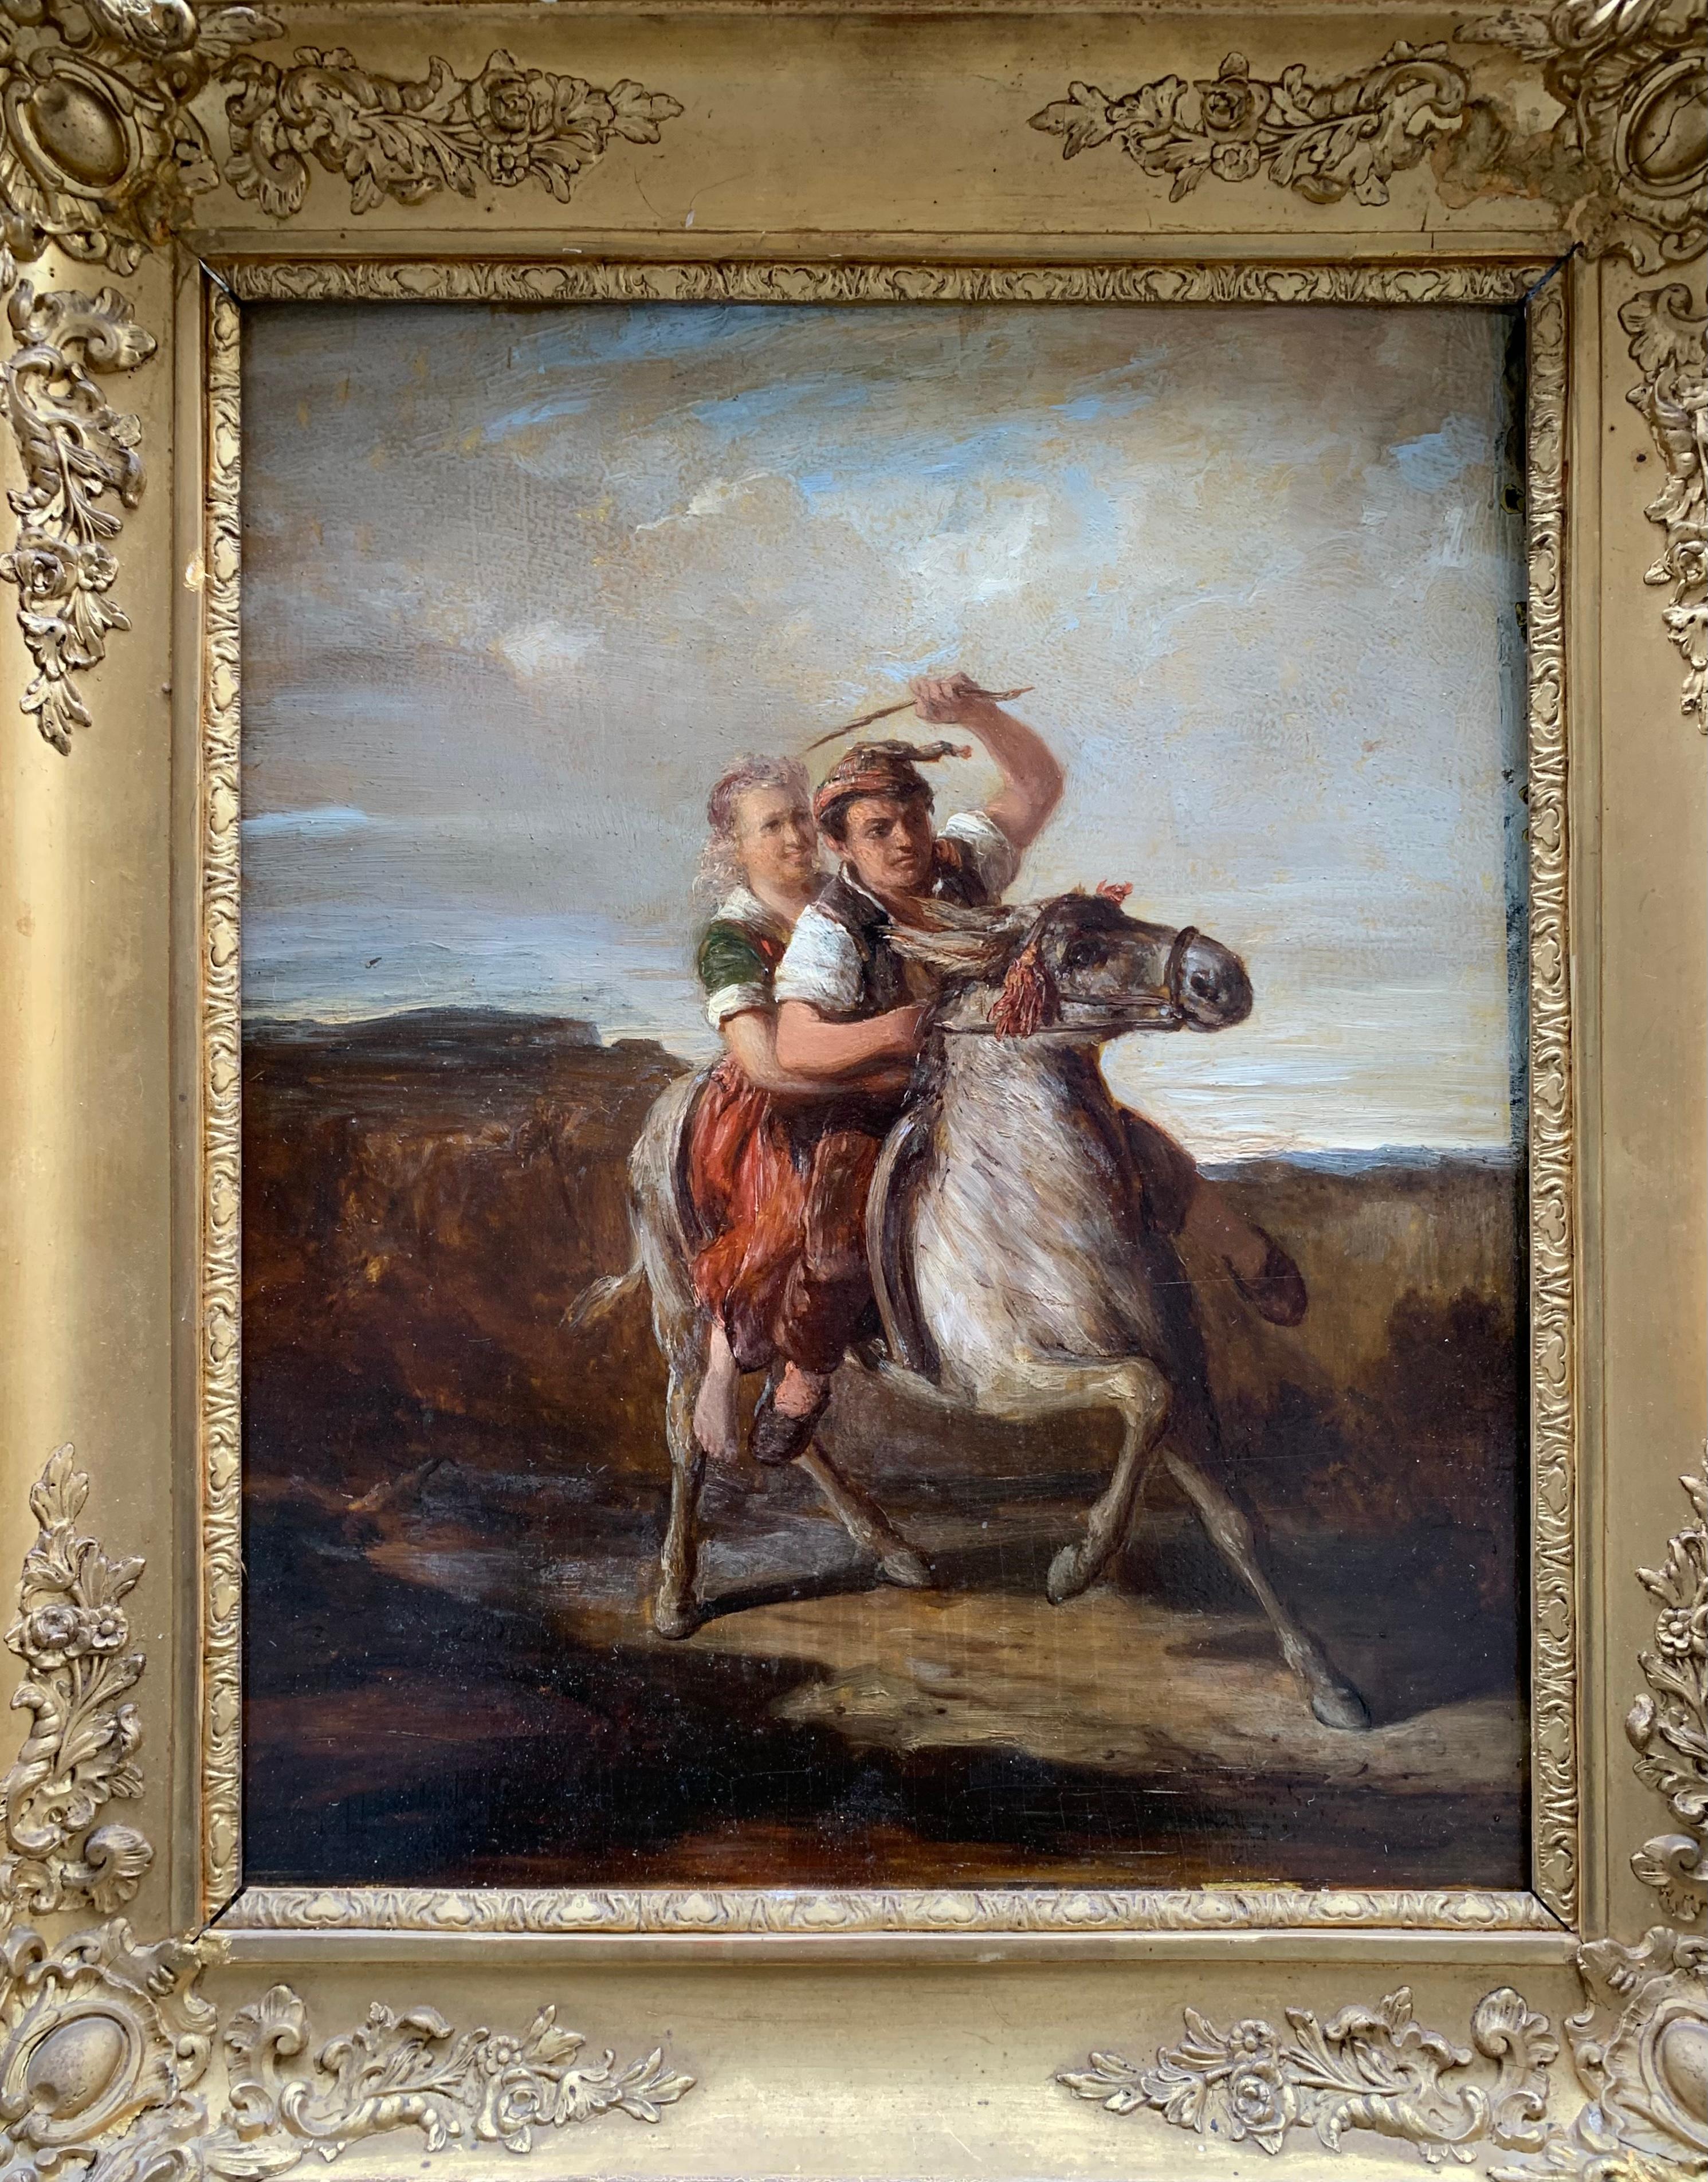 The Runaways, or Swiss boy on Donkey. Attributed to Joseph Hornung.